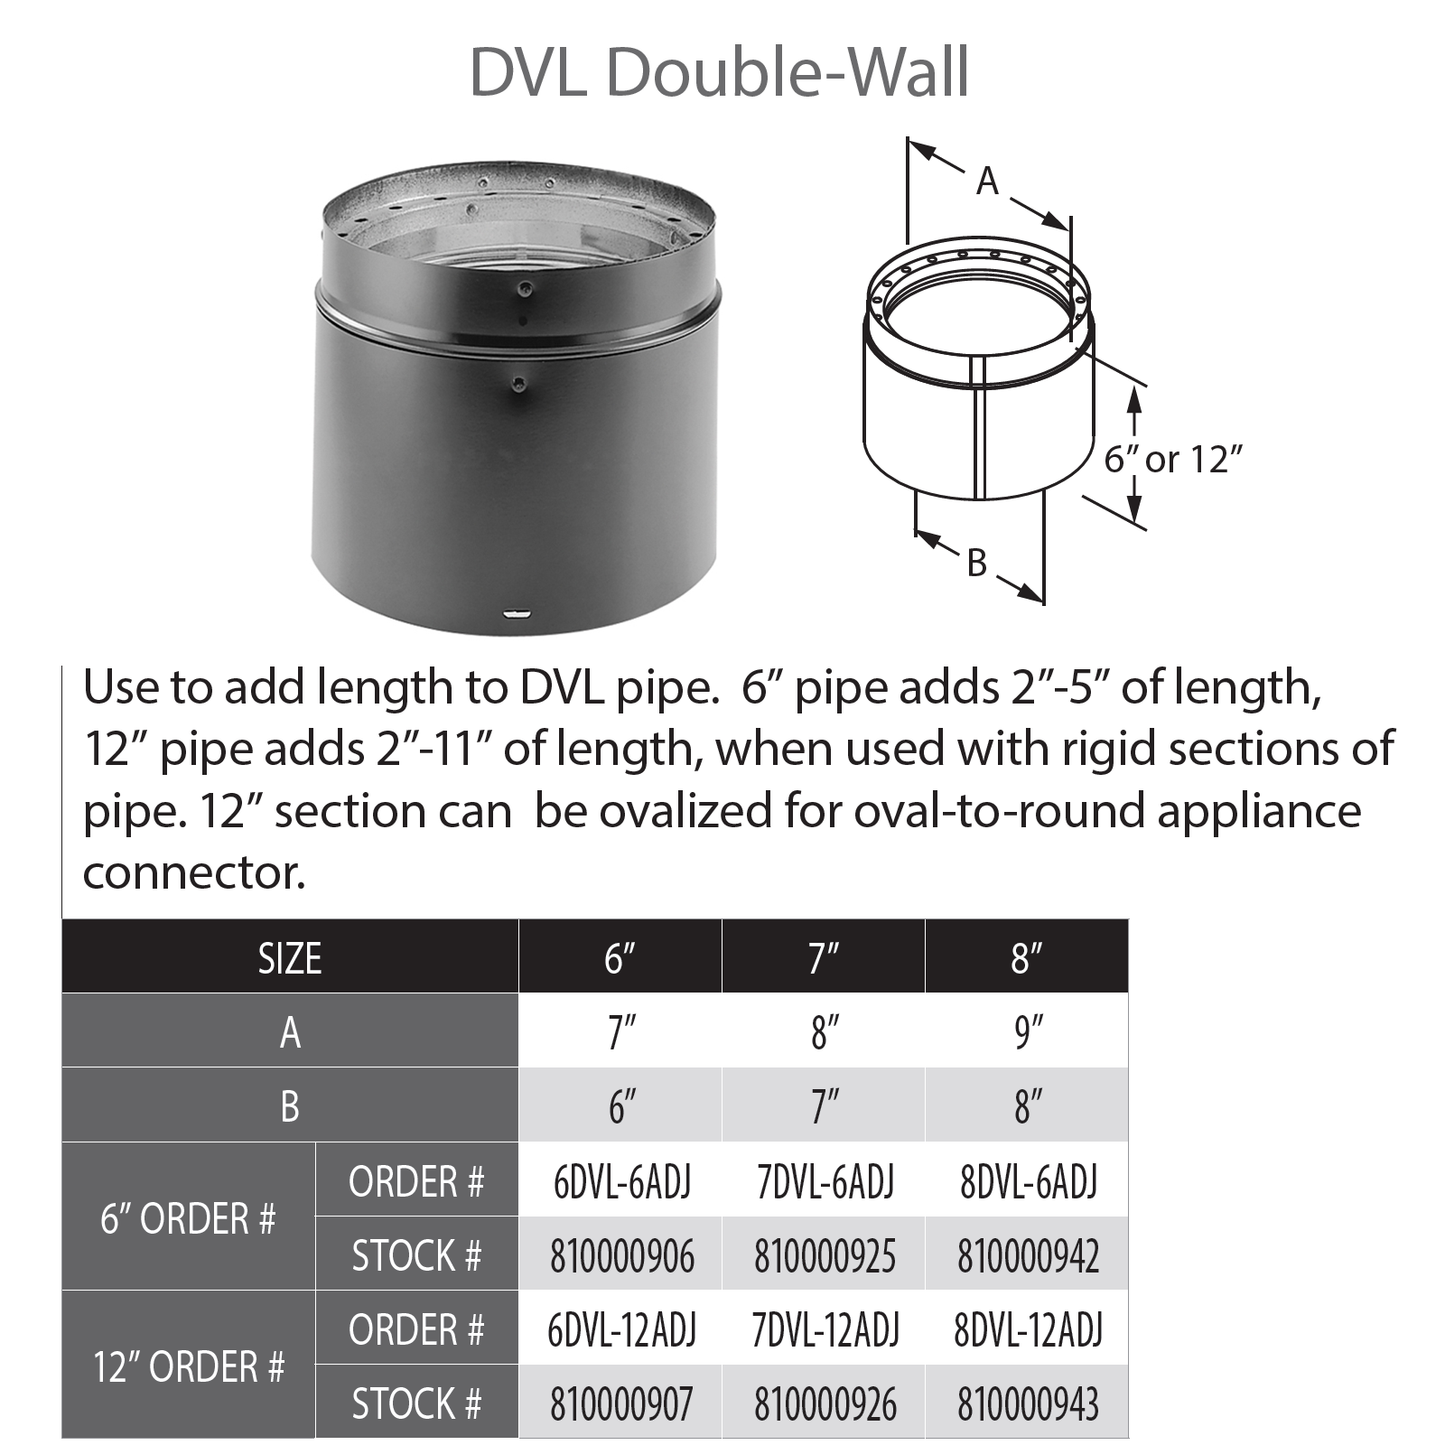 DuraVent 6DVL-18 DVL 6 Double Wall Black Pipe - 18